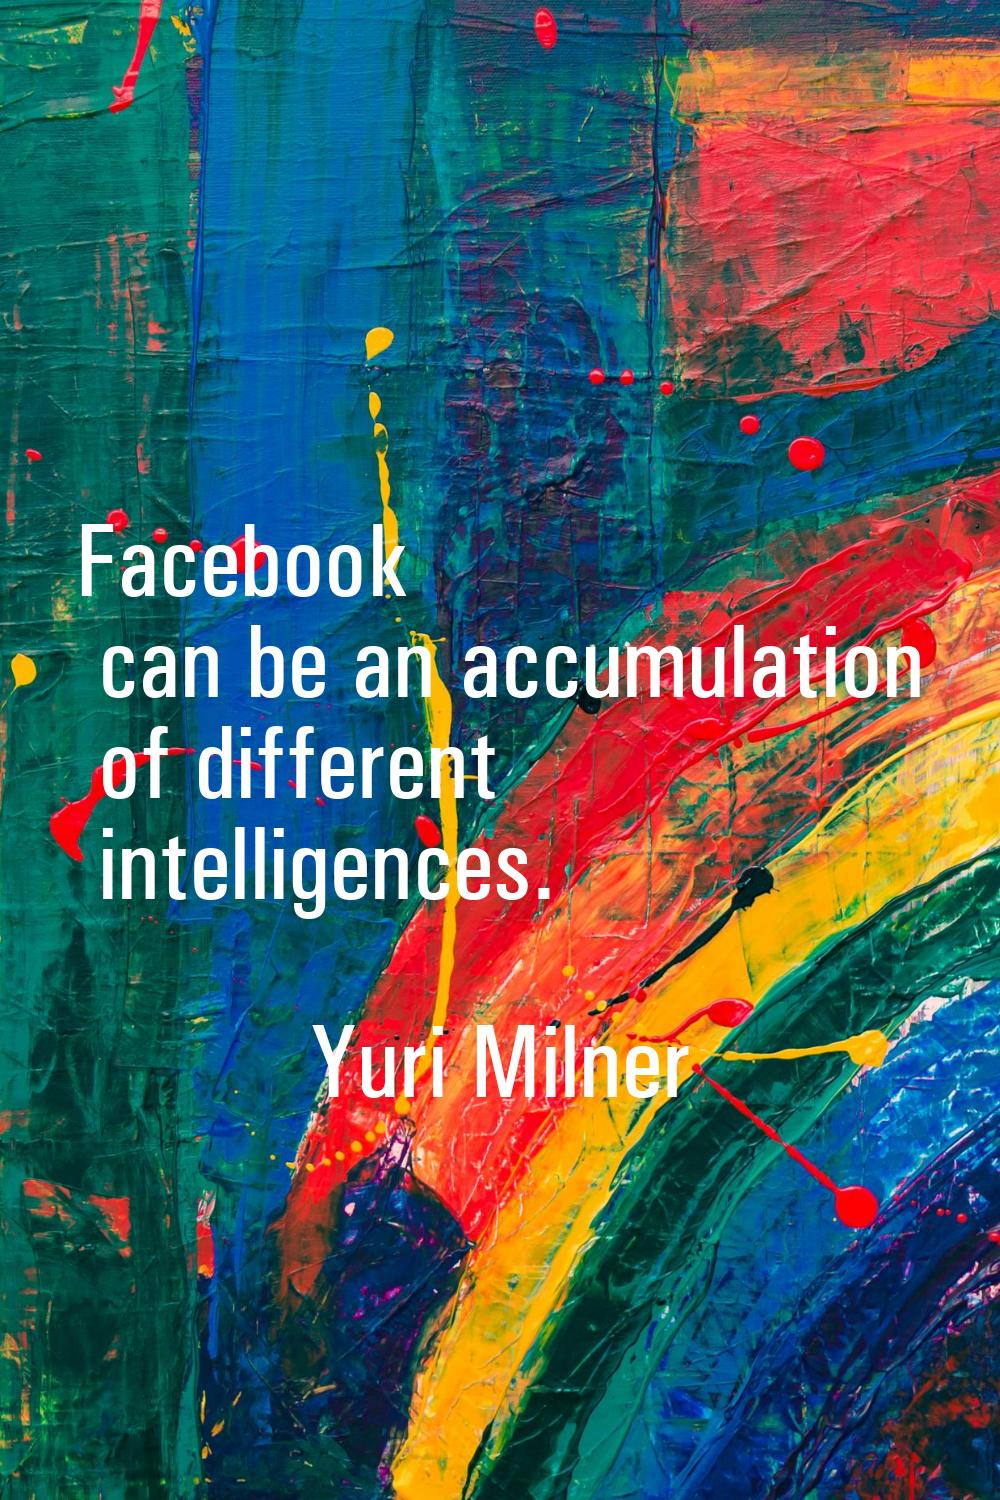 Facebook can be an accumulation of different intelligences.